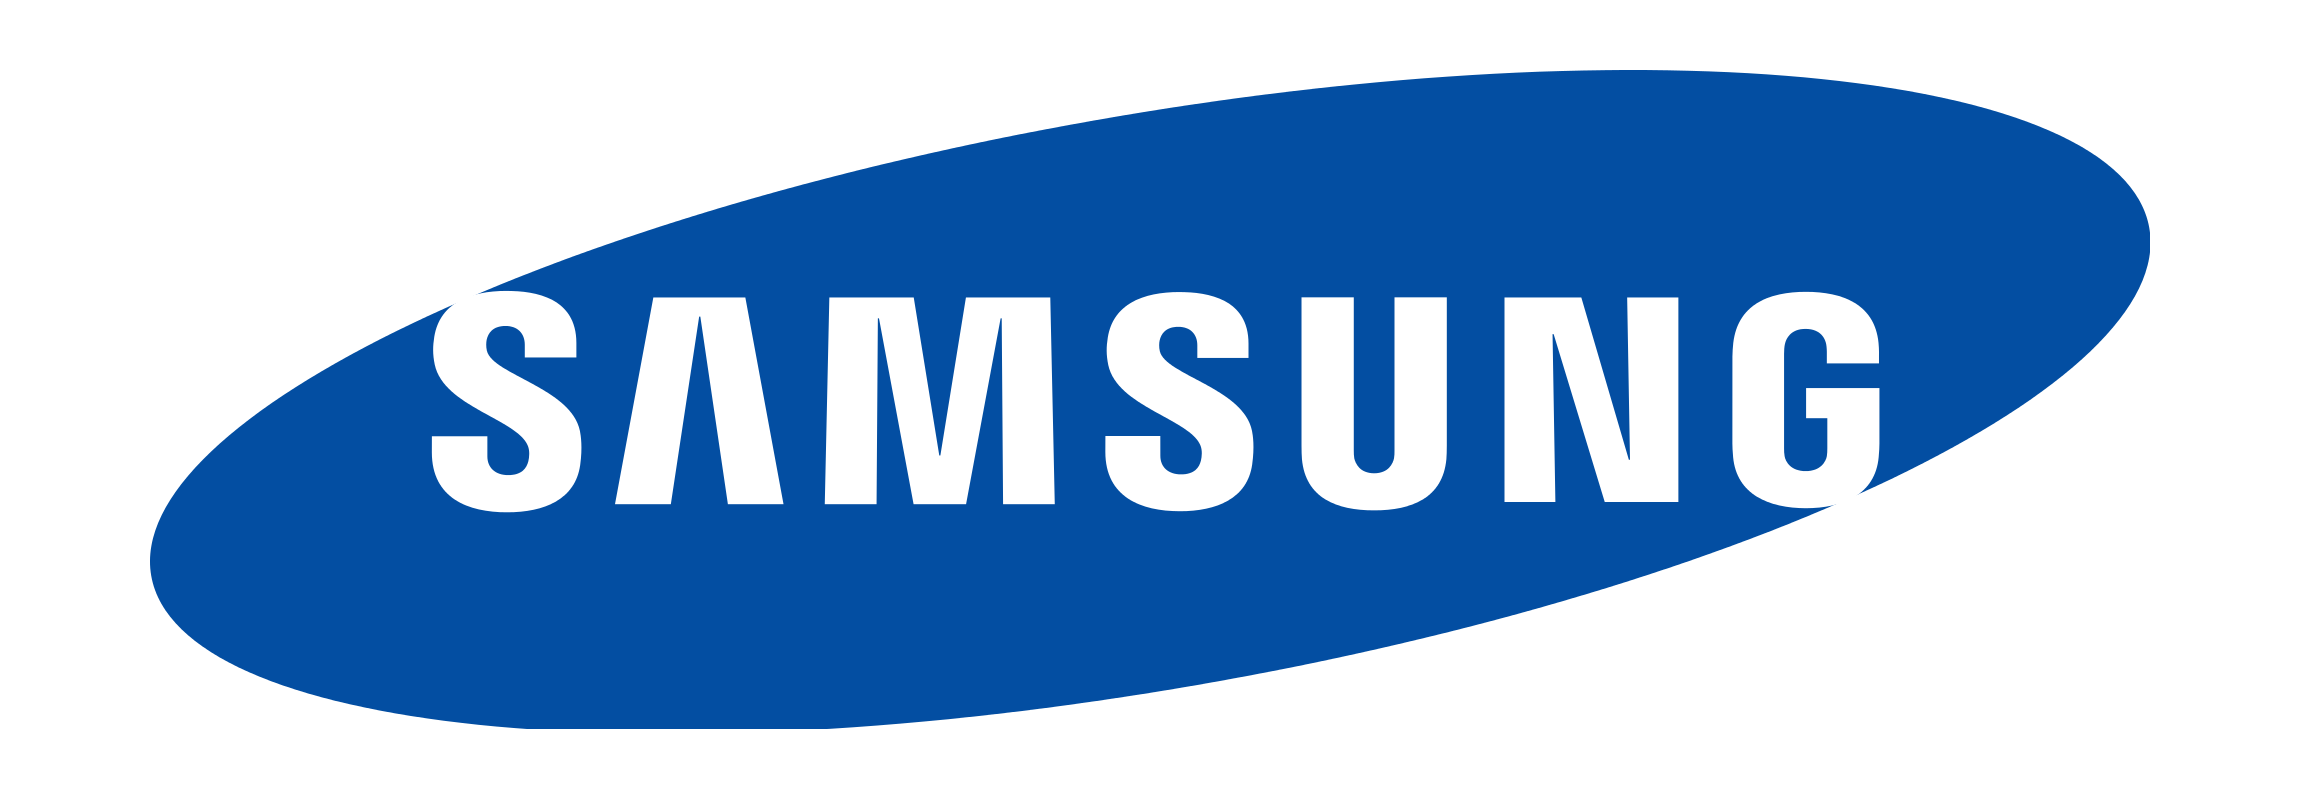 Samsung tasks corporate organisations on fight against COVID-19 pandemic